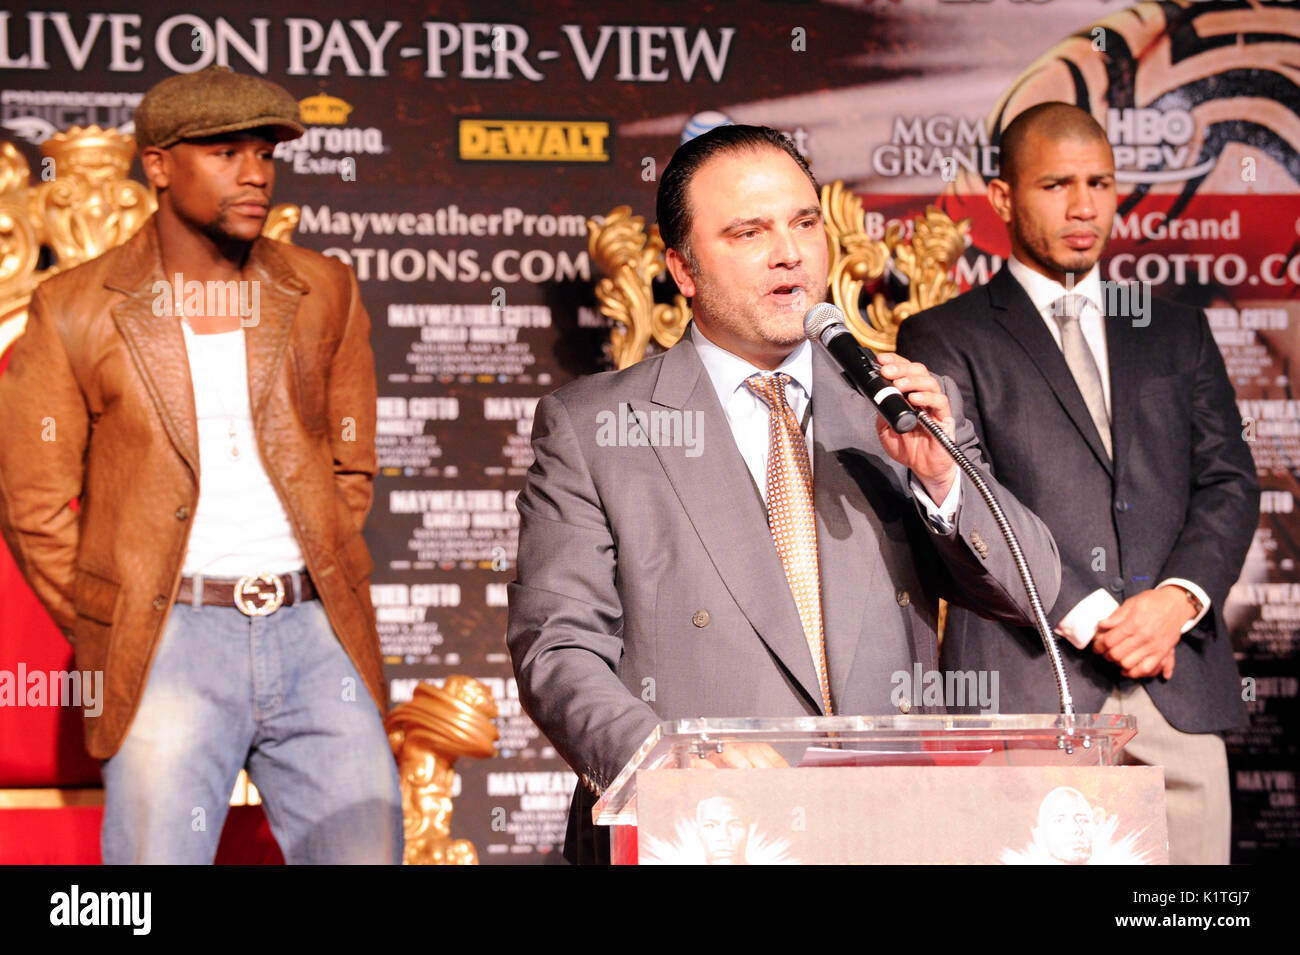 press conference Grauman's Chinese Theatre Hollywood March 1,2012. Mayweather Cotto will meet WBA Super Welterweight World Championship fight May 5 MGM Grand Las Vegas. Stock Photo